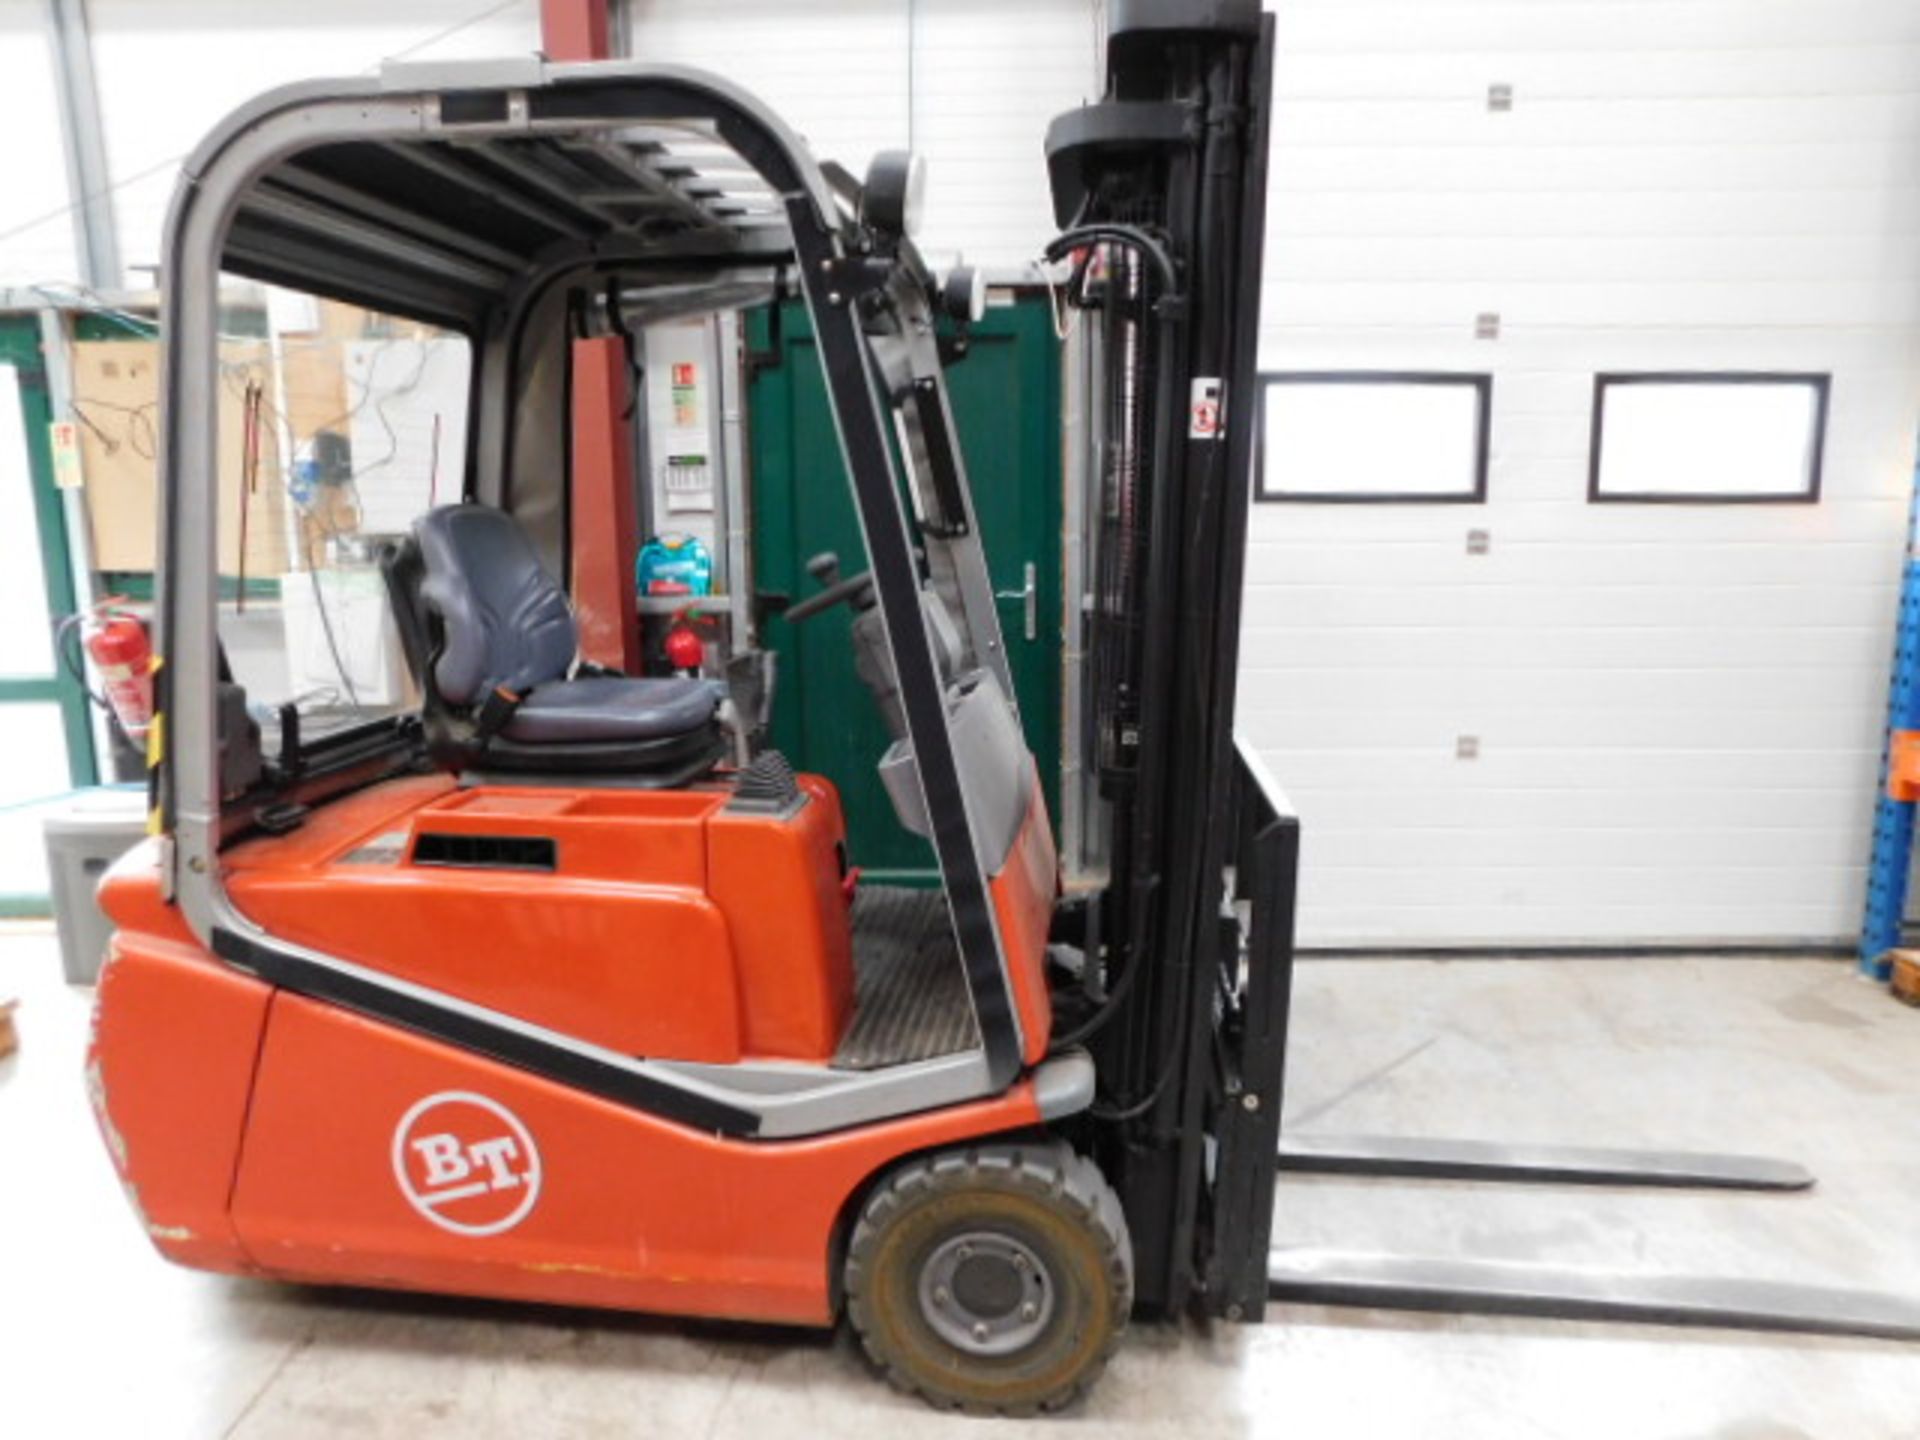 * BT Rolatruck CBE 1.6t Forklift-- Please Note: Collection date to be confirmed after sale.